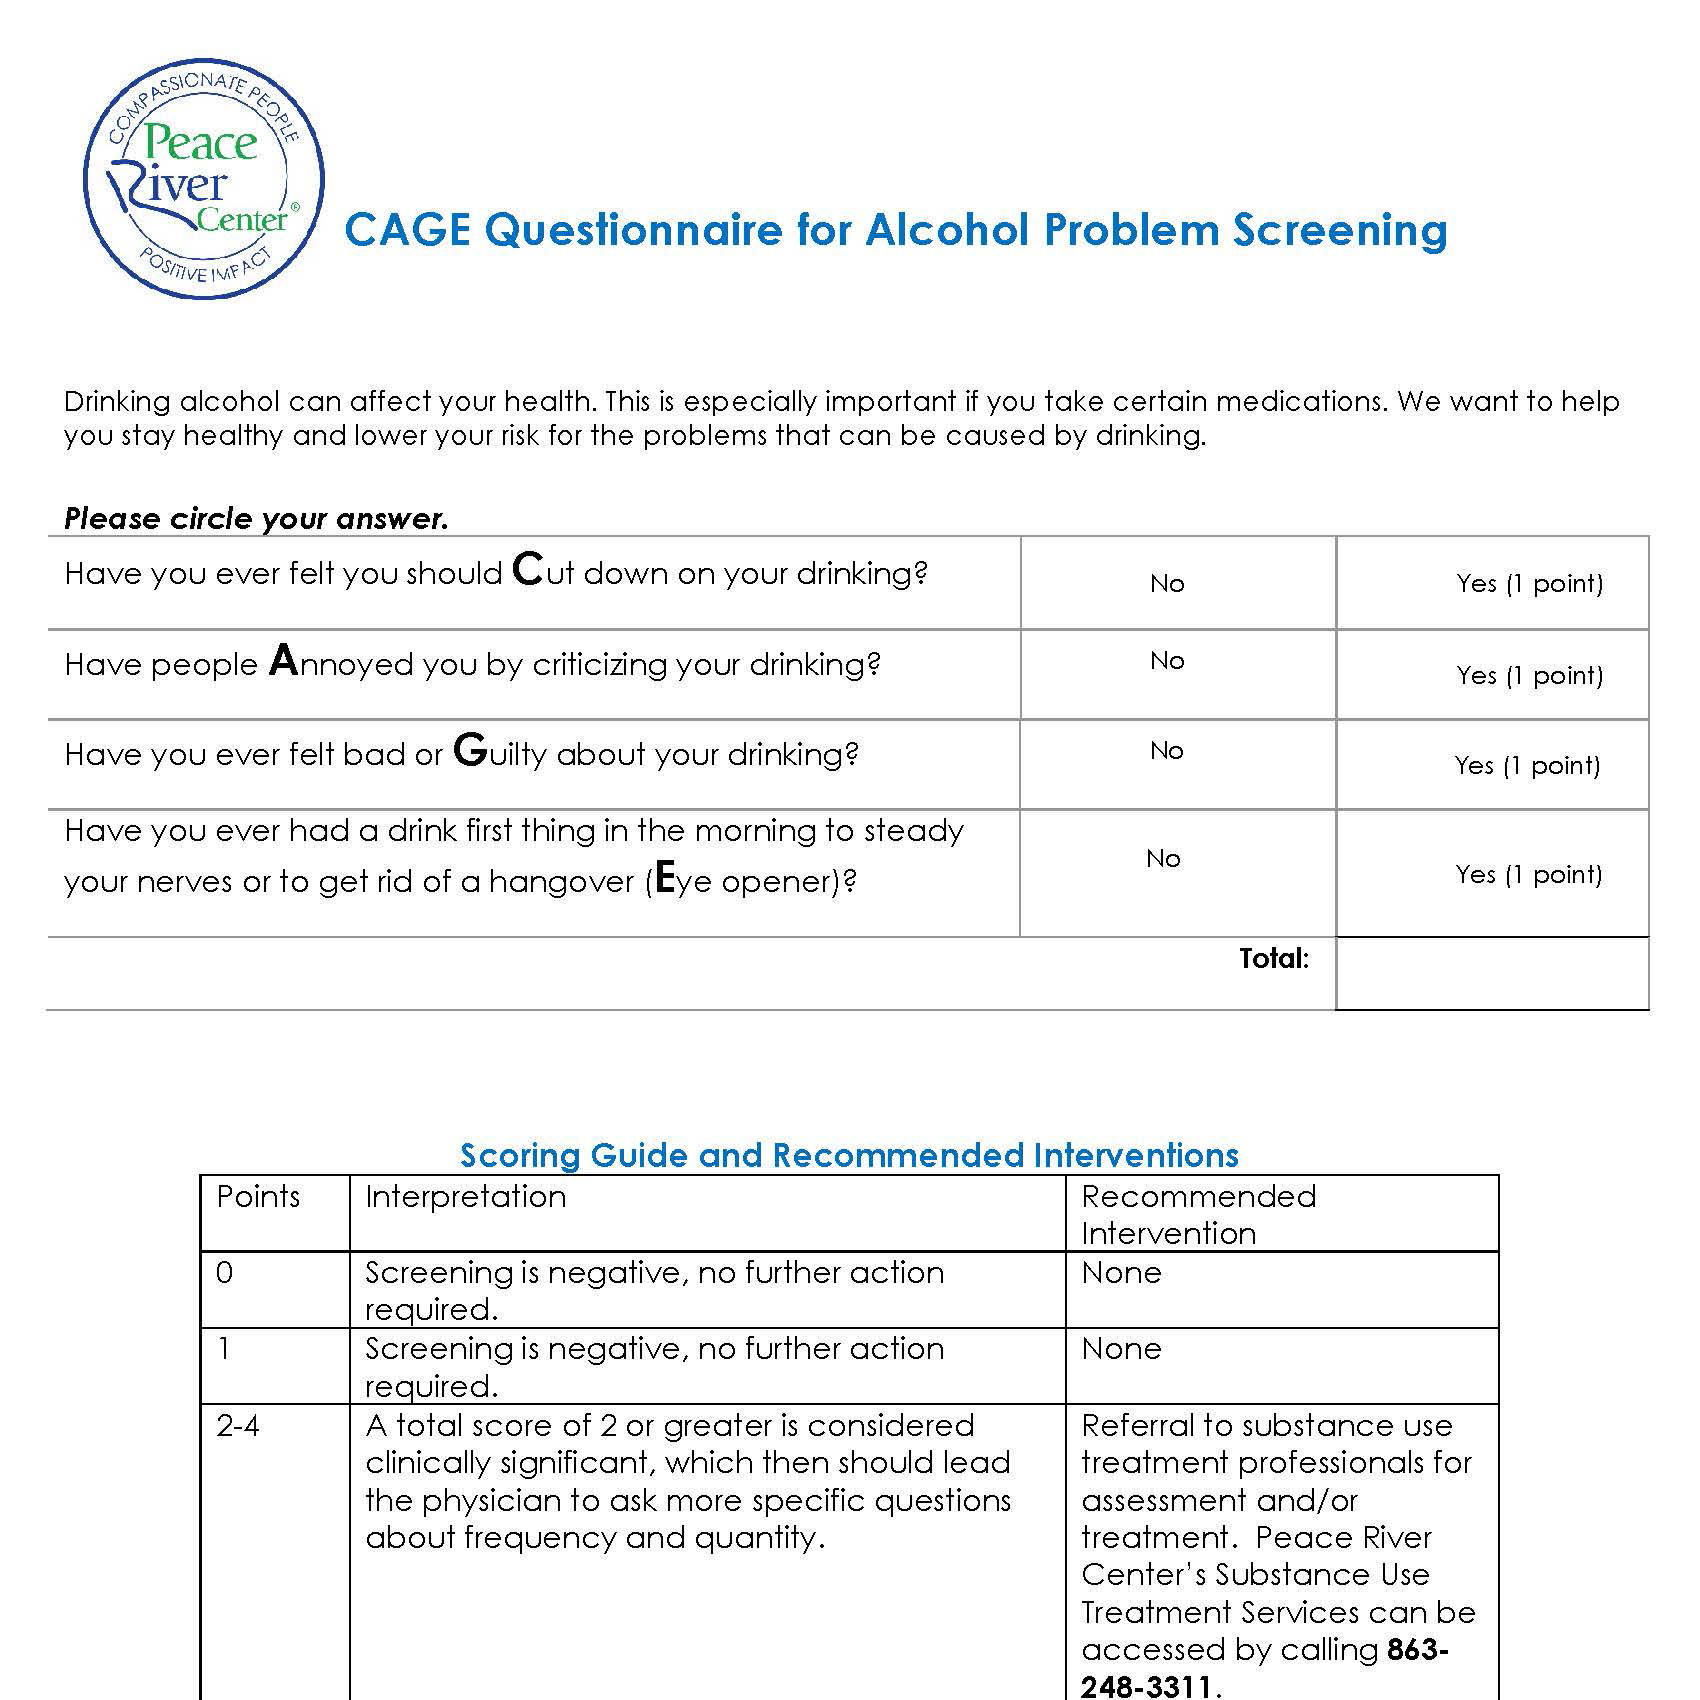 CAGE Substance Abuse Screening form image